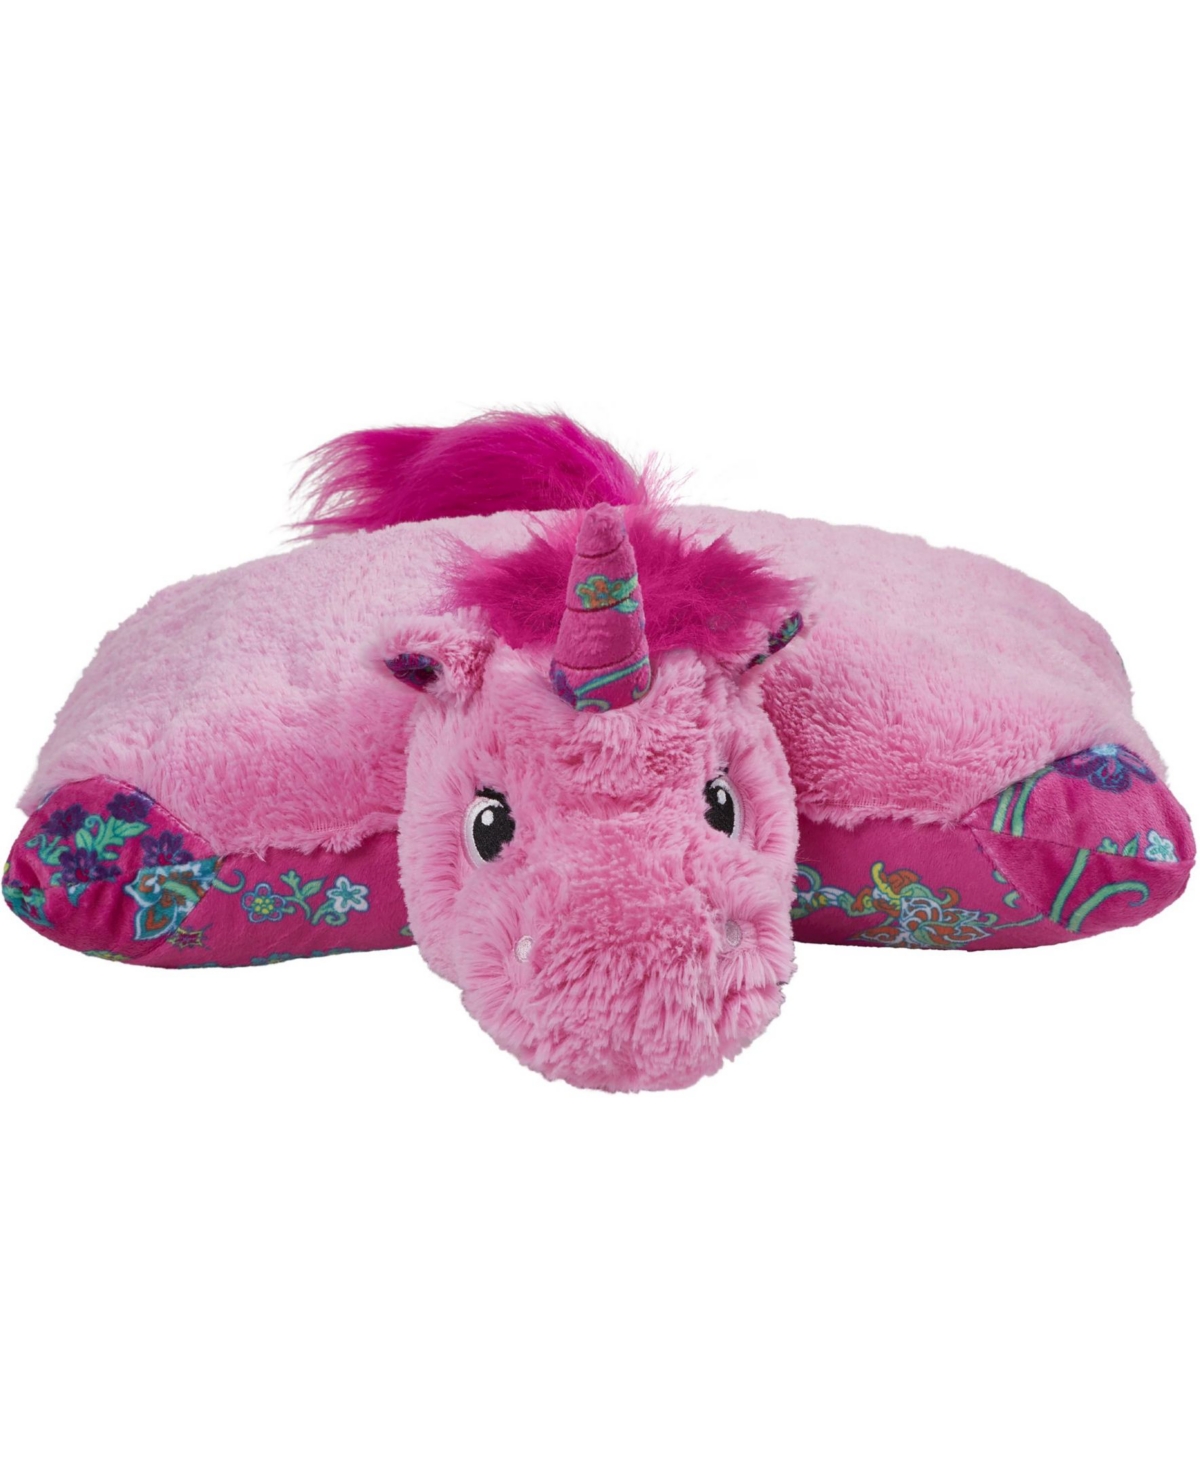 Shop Pillow Pets Colorful Unicorn Stuffed Animal Plush Toy In Pink